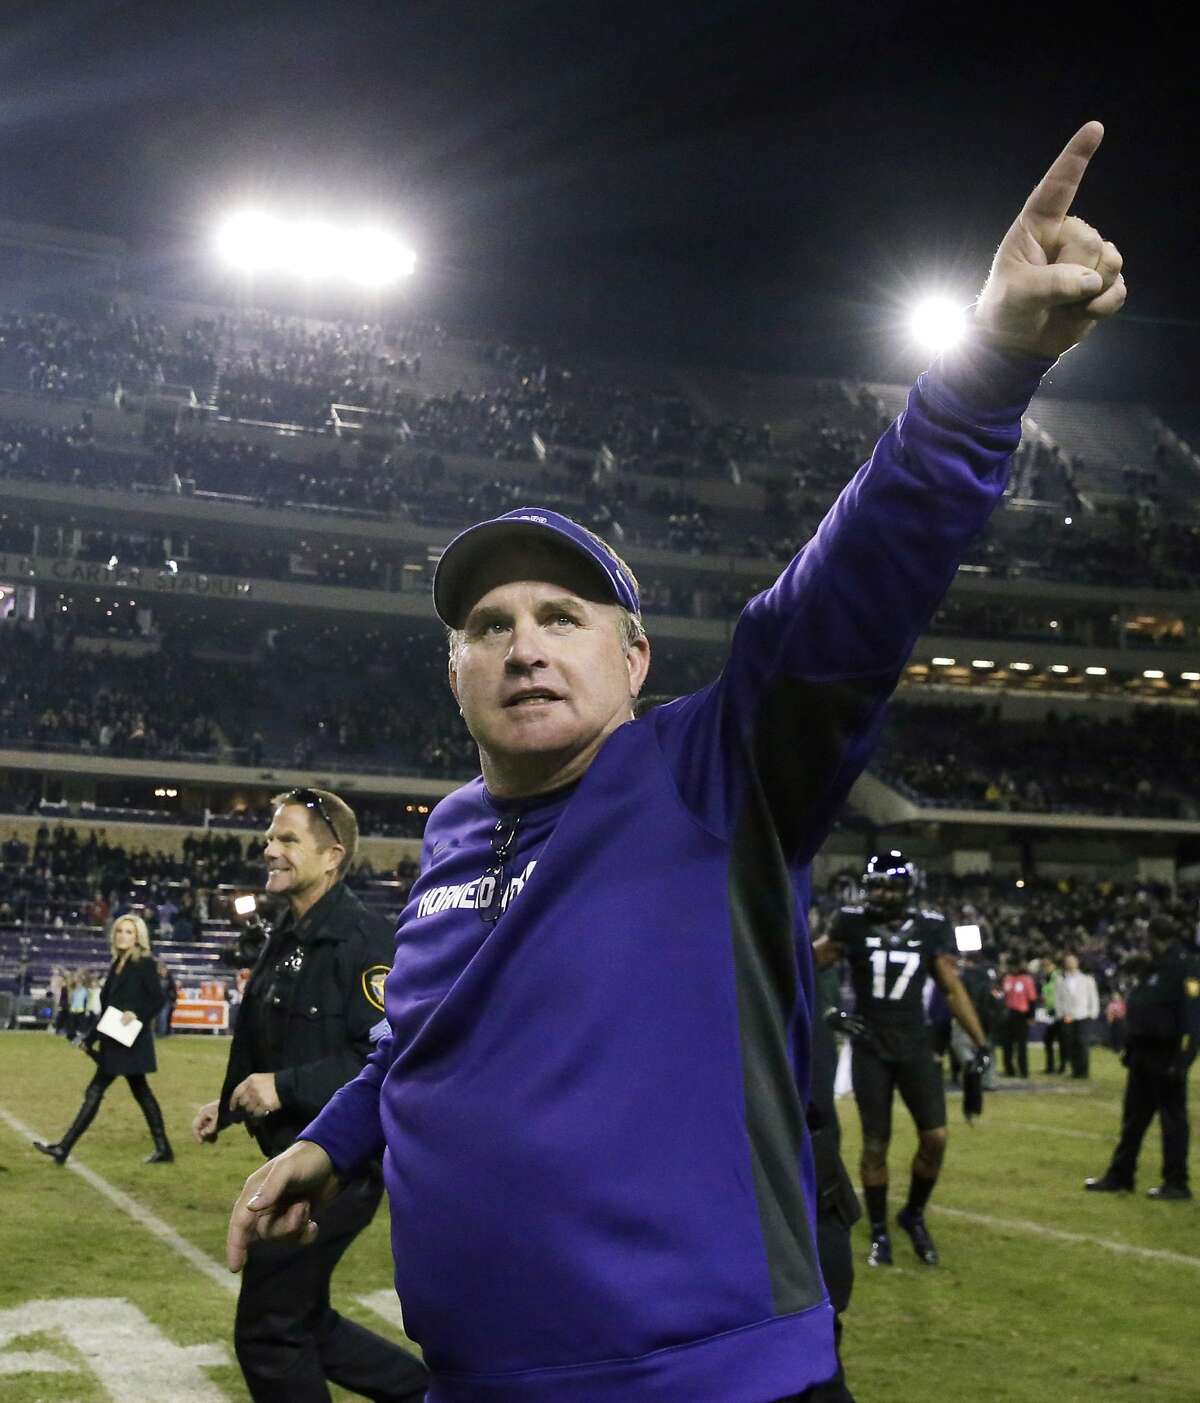 FILE - In tis Nov. 8, 2014, file photo, TCU head coach Gary Patterson points to fans as he runs off the field after an NCAA college football game against Kansas State in Fort Worth, Texas. Patterson was selected as The Associated Press college football coach of the year on Wednesday, Dec. 24, 2014. It was the second time he won the award. He also won in 2009. (AP Photo/LM Otero, File)